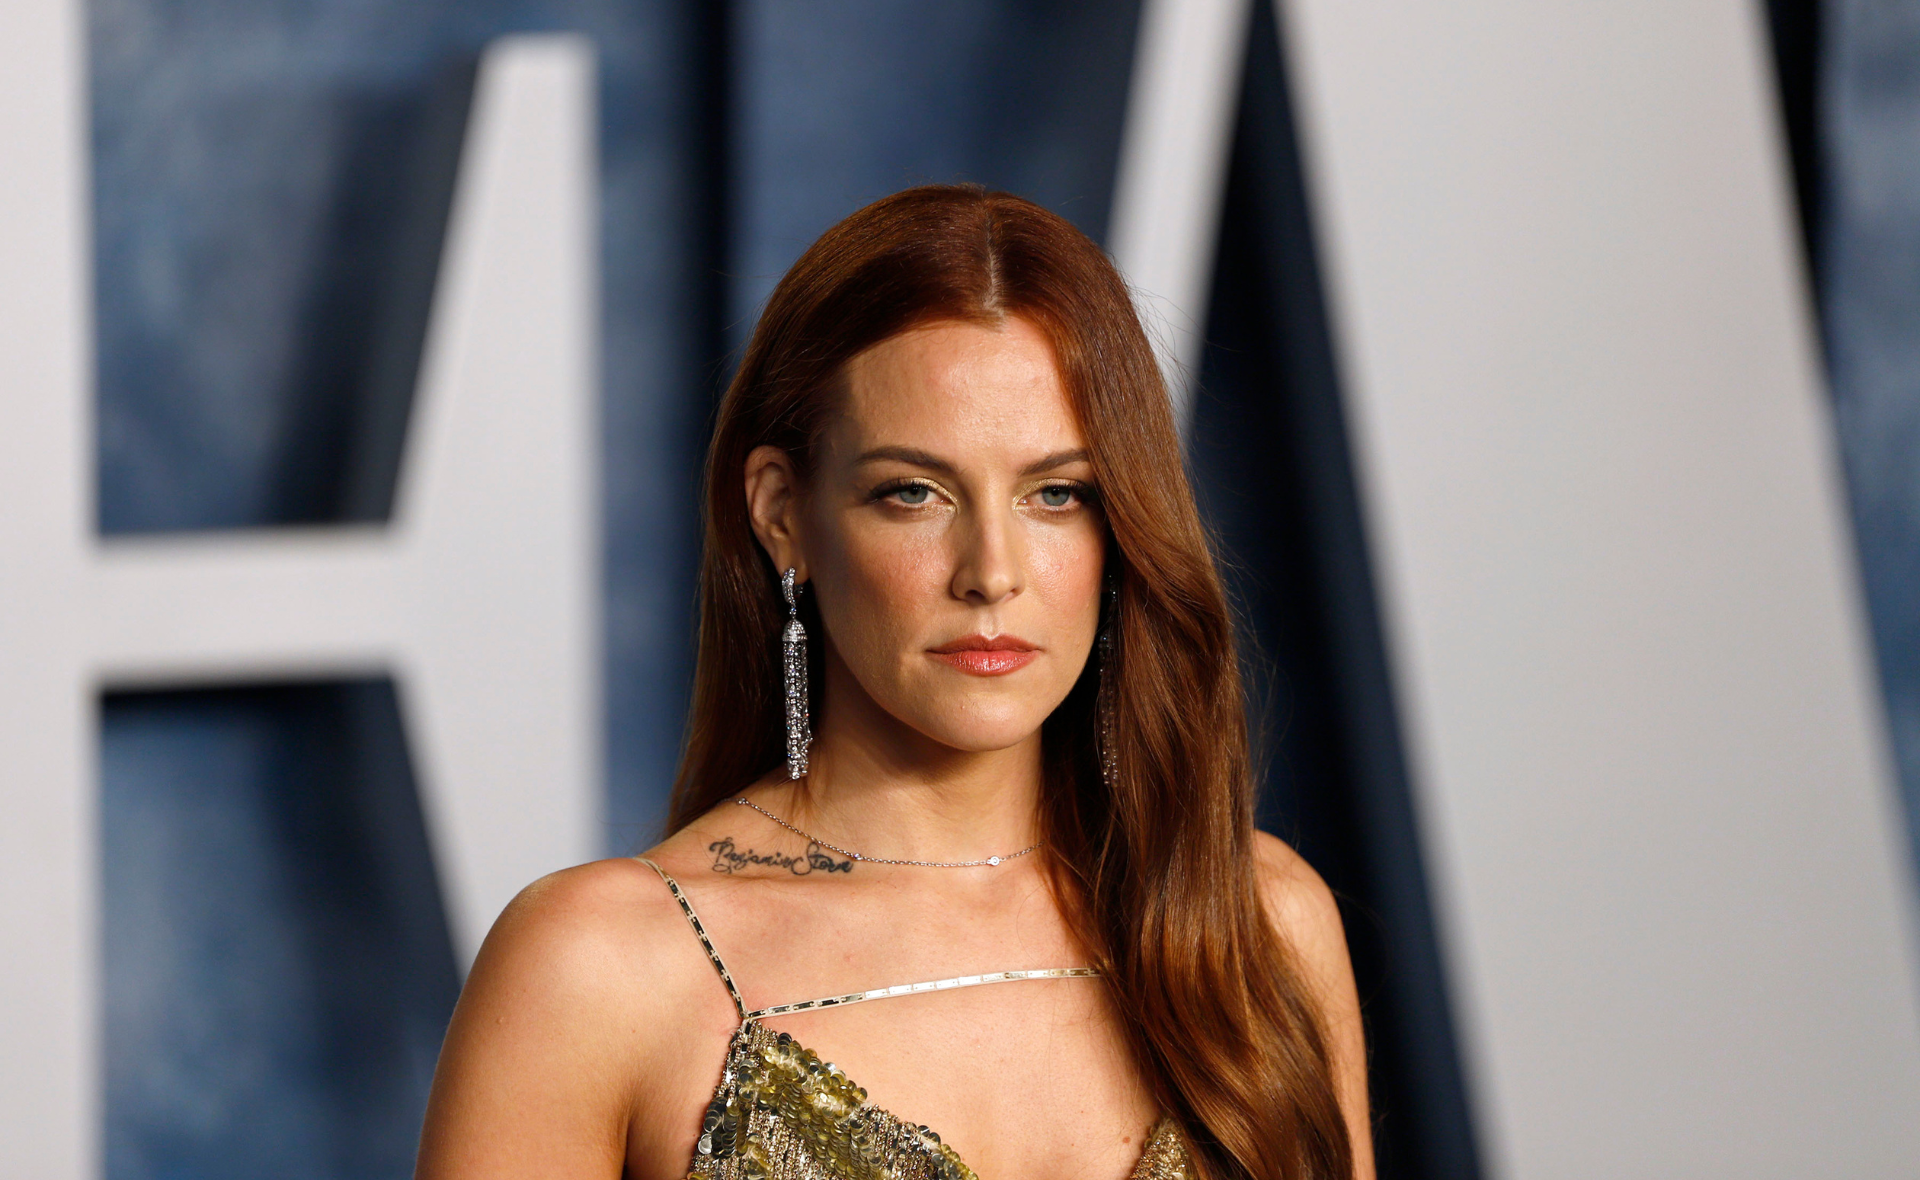 Presley family feud cools as Riley Keough focuses on protecting her family